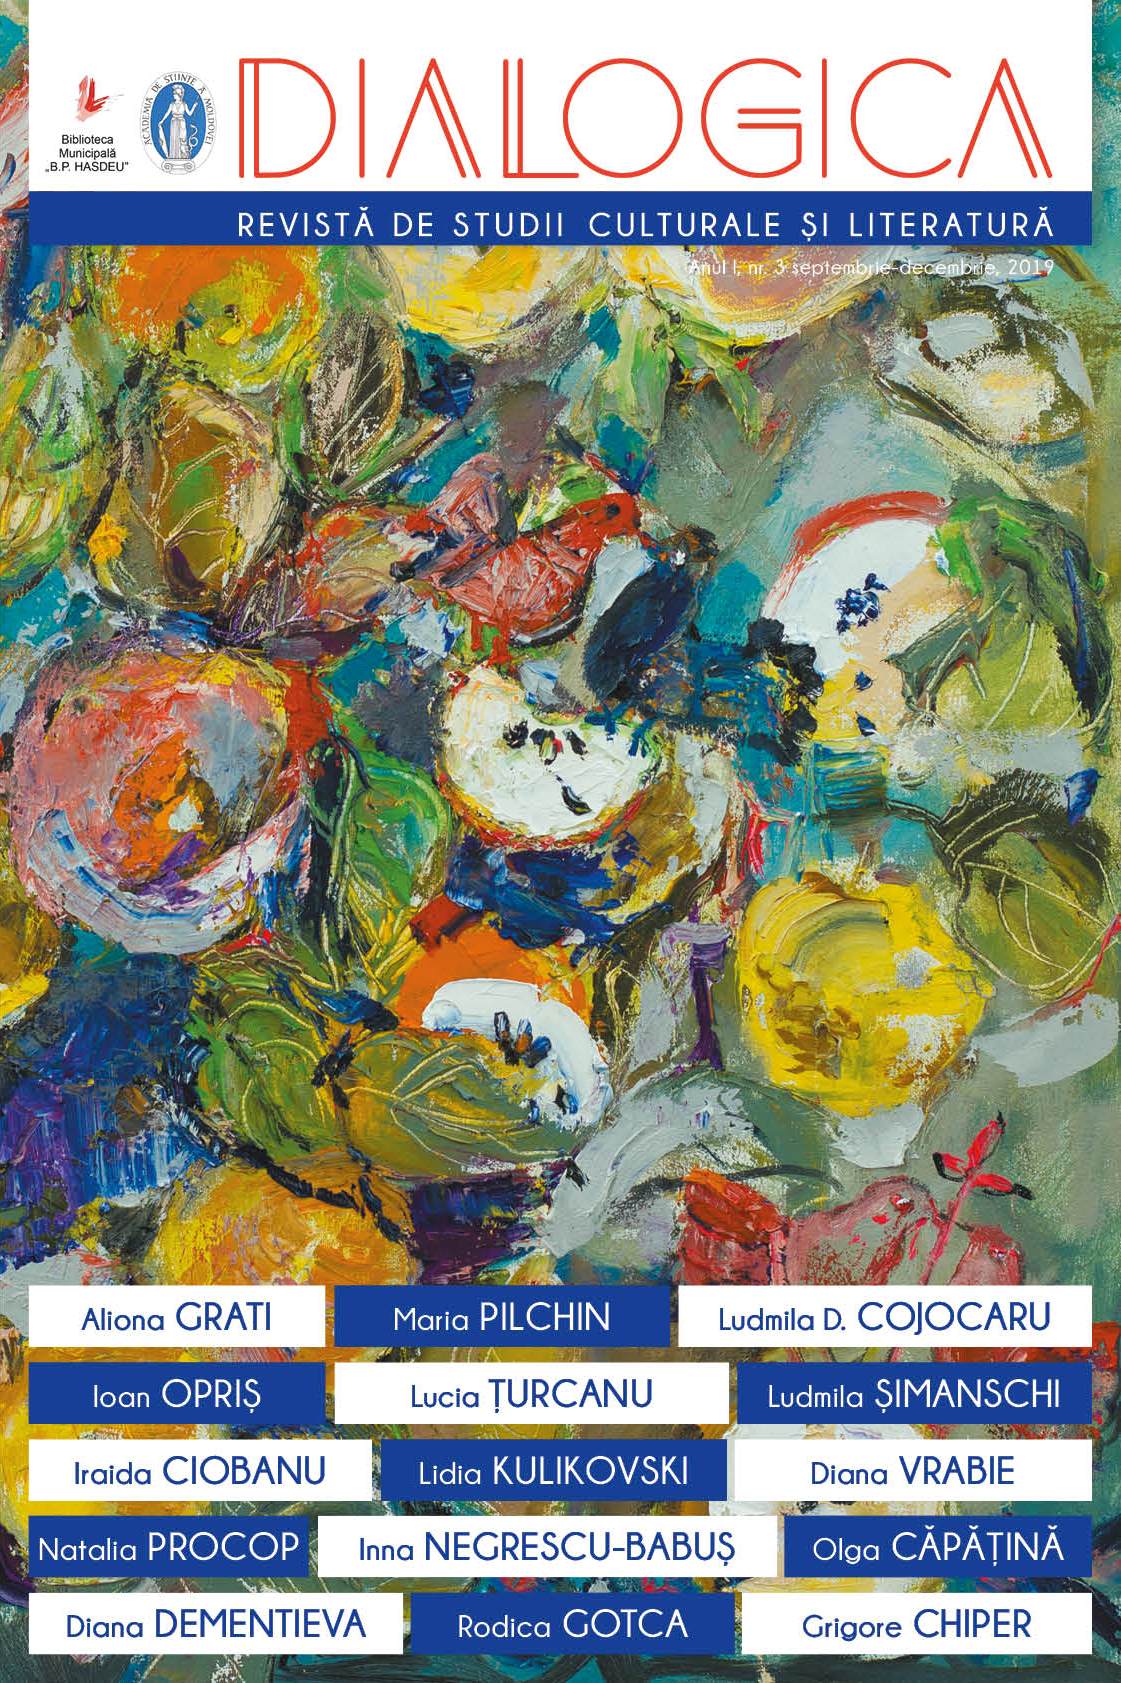 Horia Gârbea Pies with pride; Vitalie Ciobanu Days after Oreste; Lilia Calancea Wedding Sketches;
Nicolae Spătaru The man banished by clocks; Short prose (anthology Iulian Ciocan); 1312 sirens.
Romanian prose from the second decade (anthology Horia G Cover Image